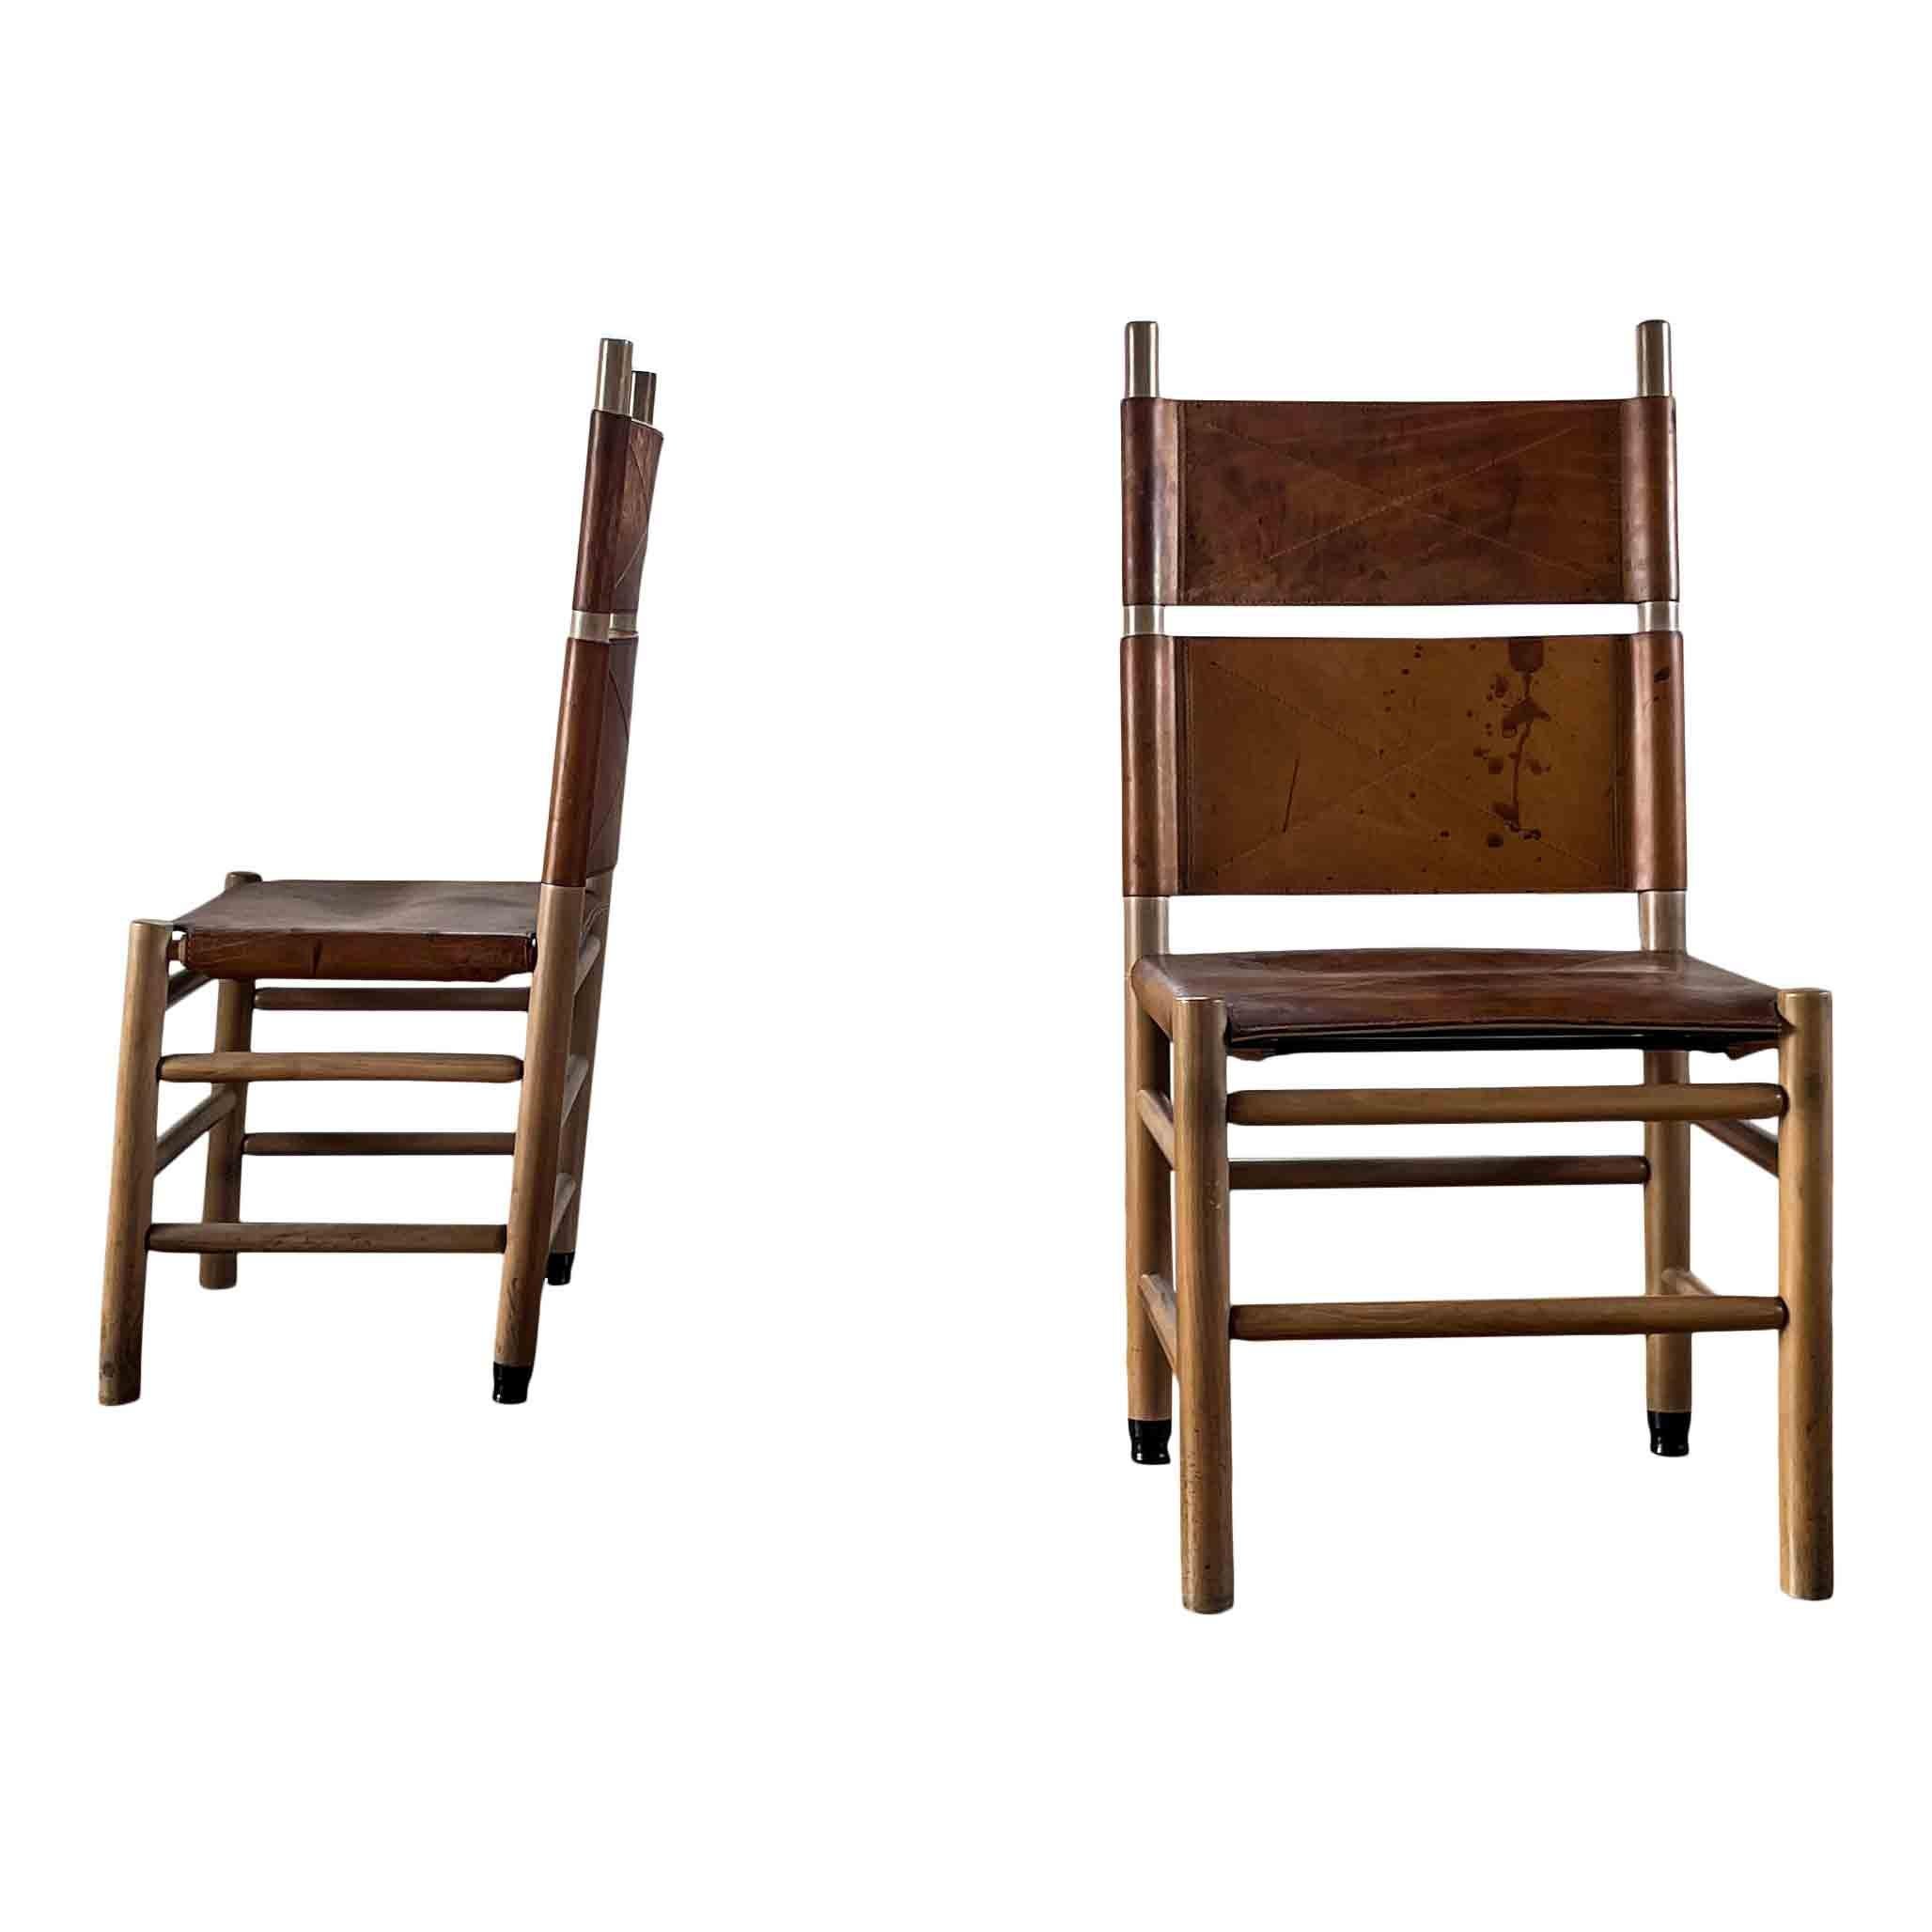 Carlo Scarpa Cognac Leather “Kentucky” Dining Chair for Bernini, 1977, Set of 5 For Sale 8